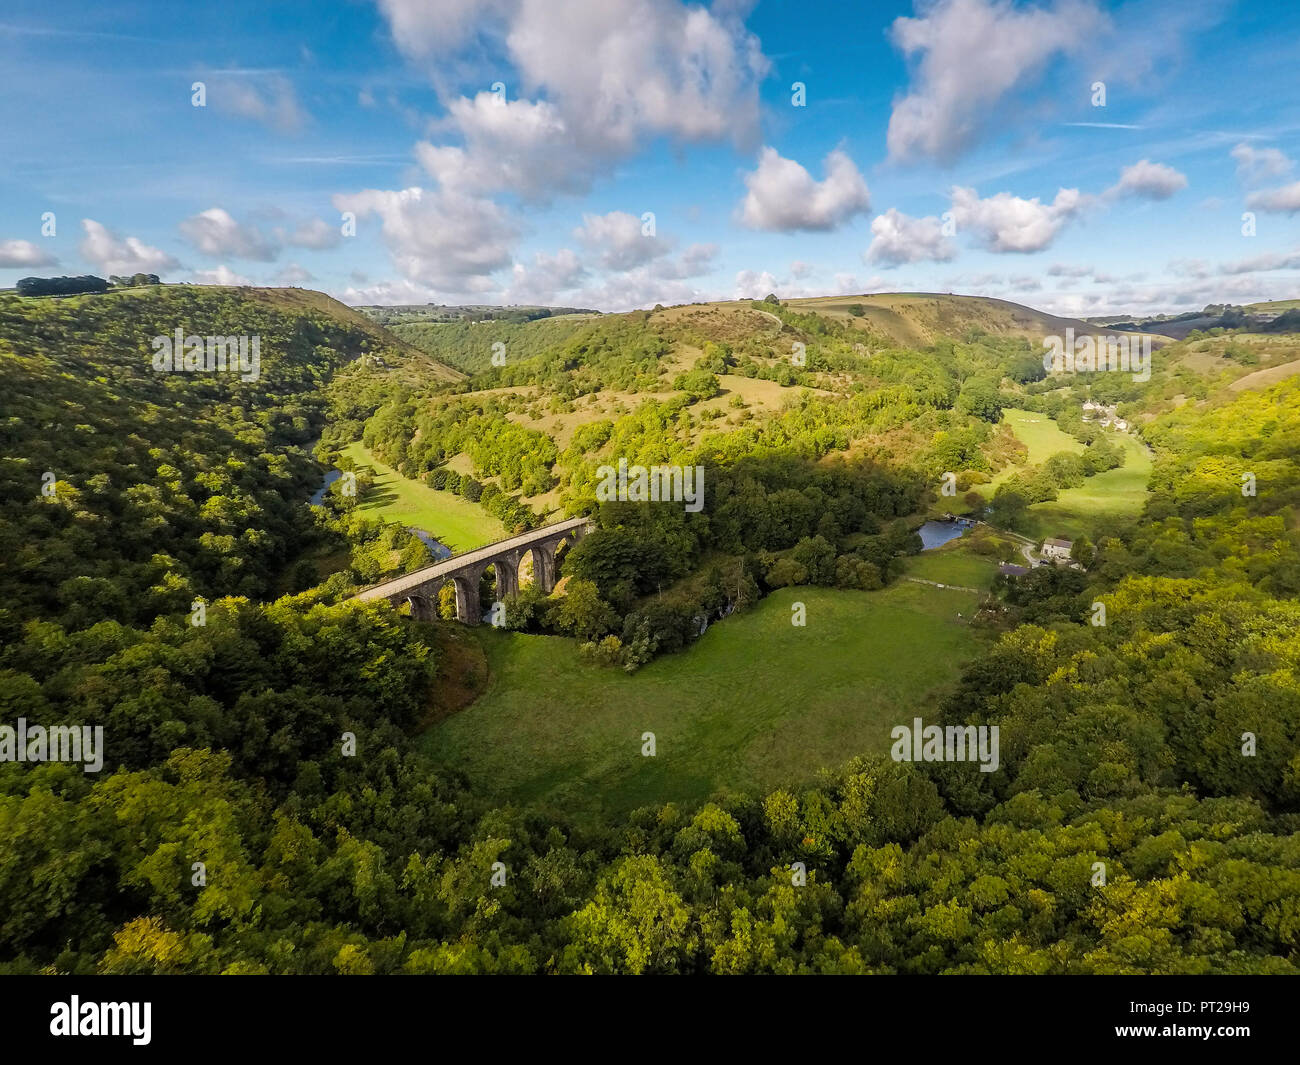 Bakewell, Derbyshire Peak District National Park, the Monsal Trail, Headstone Viaduct, Image 9, Aerial Landscape Stock Photo